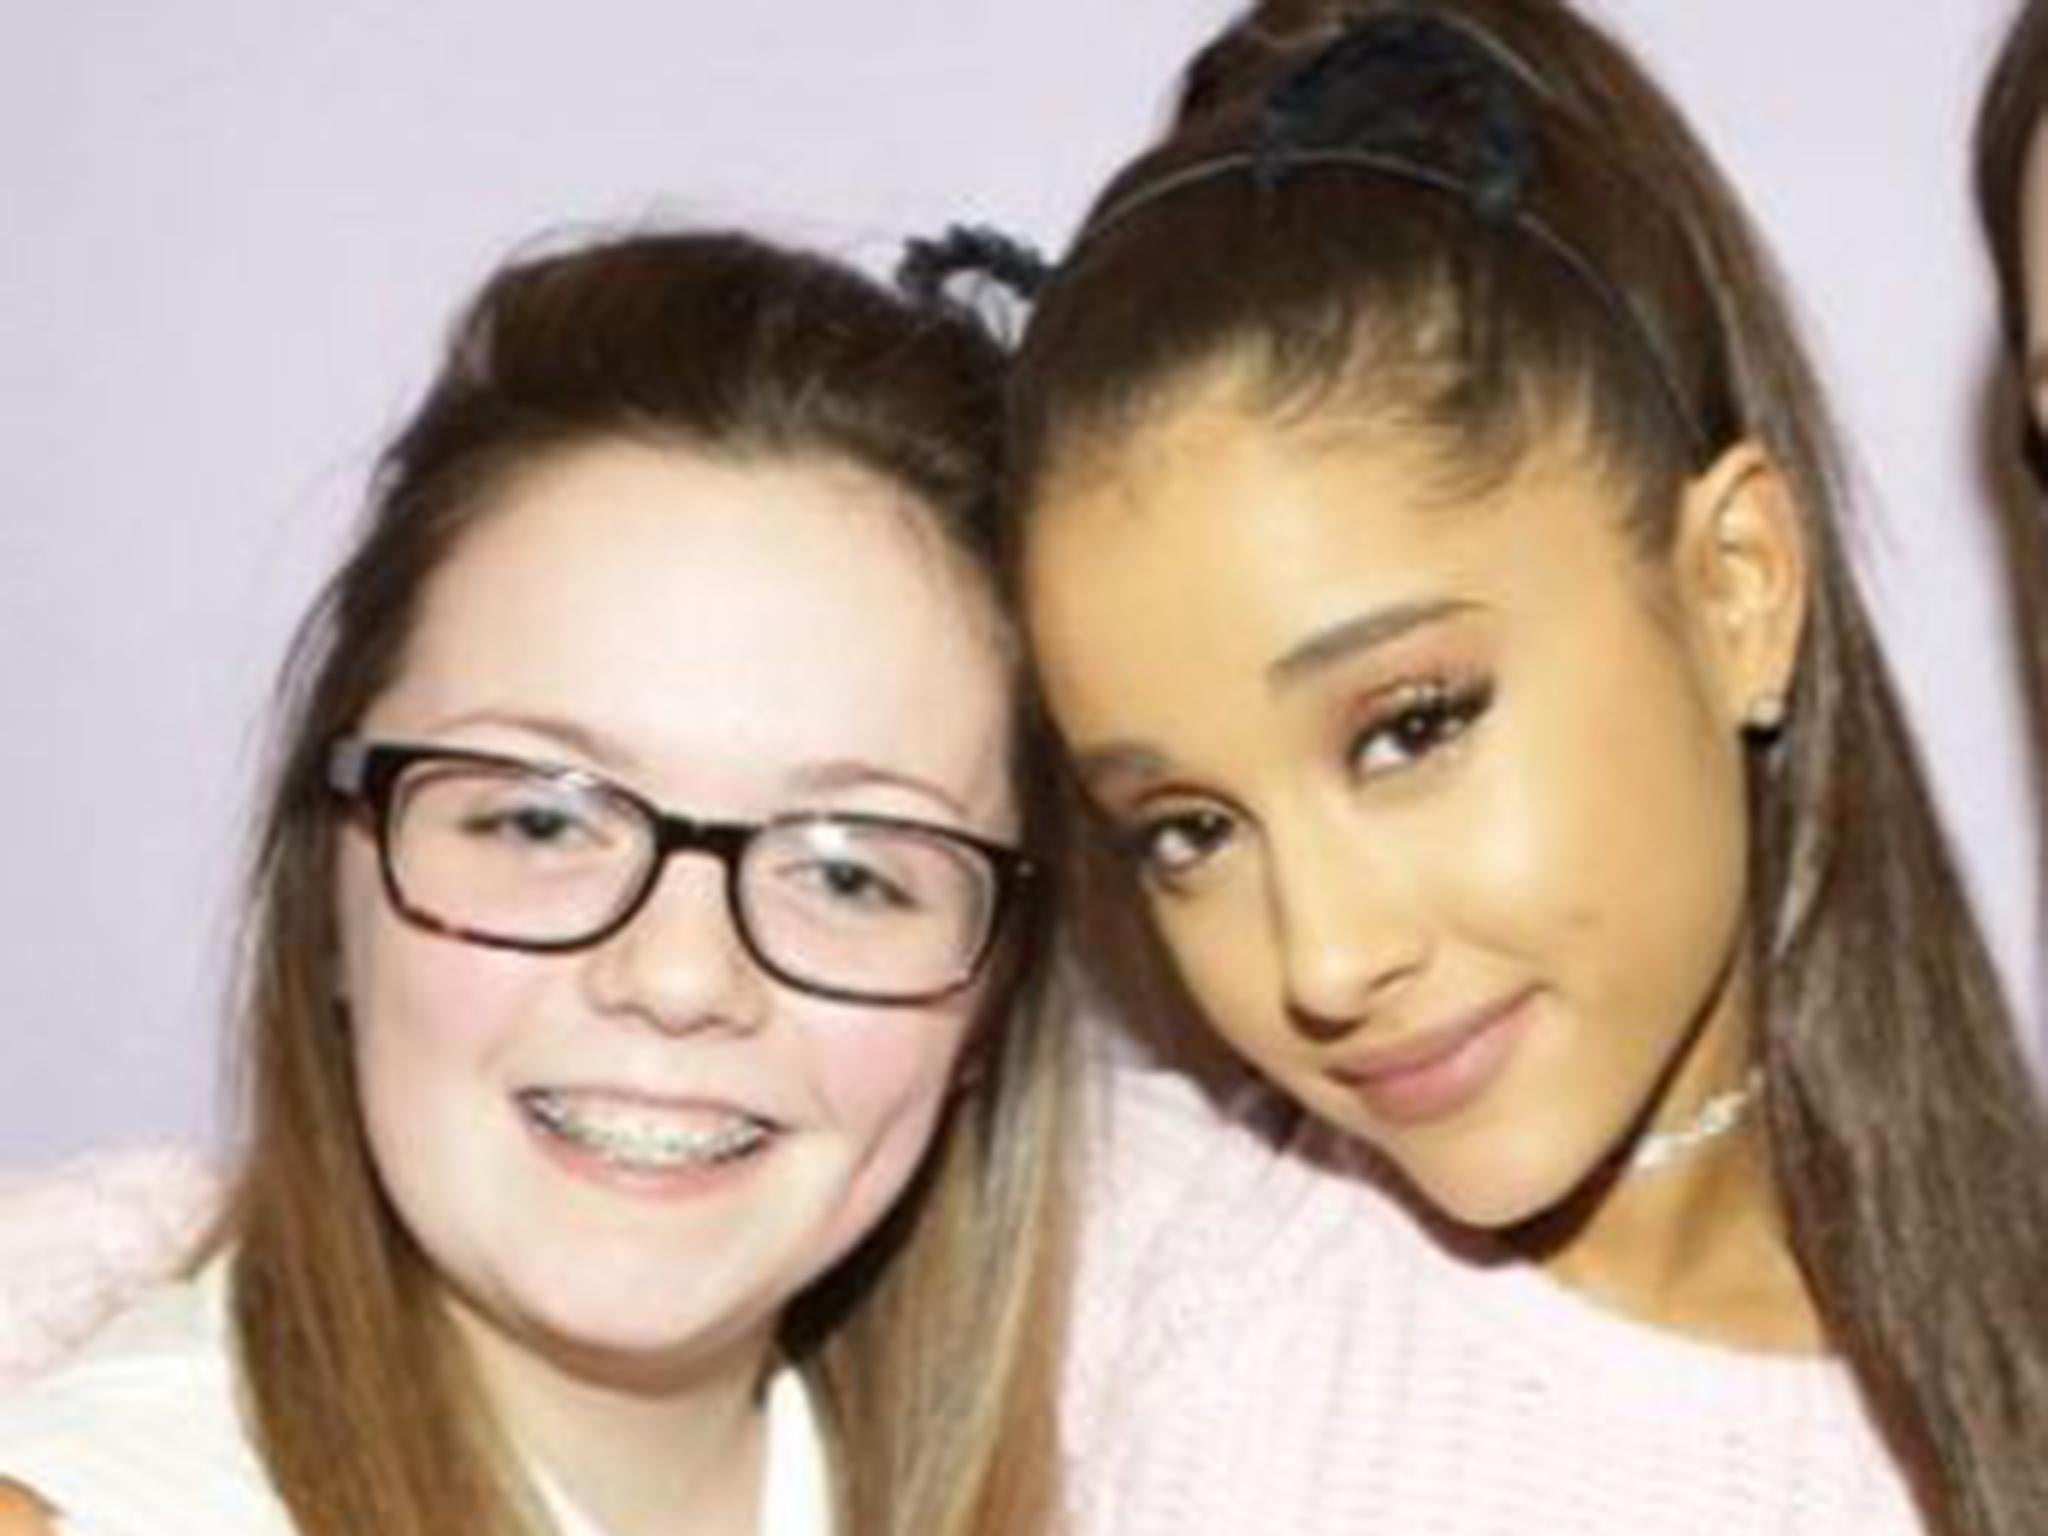 Georgina Callendar was the first of the Manchester bombing victims to be publicly named